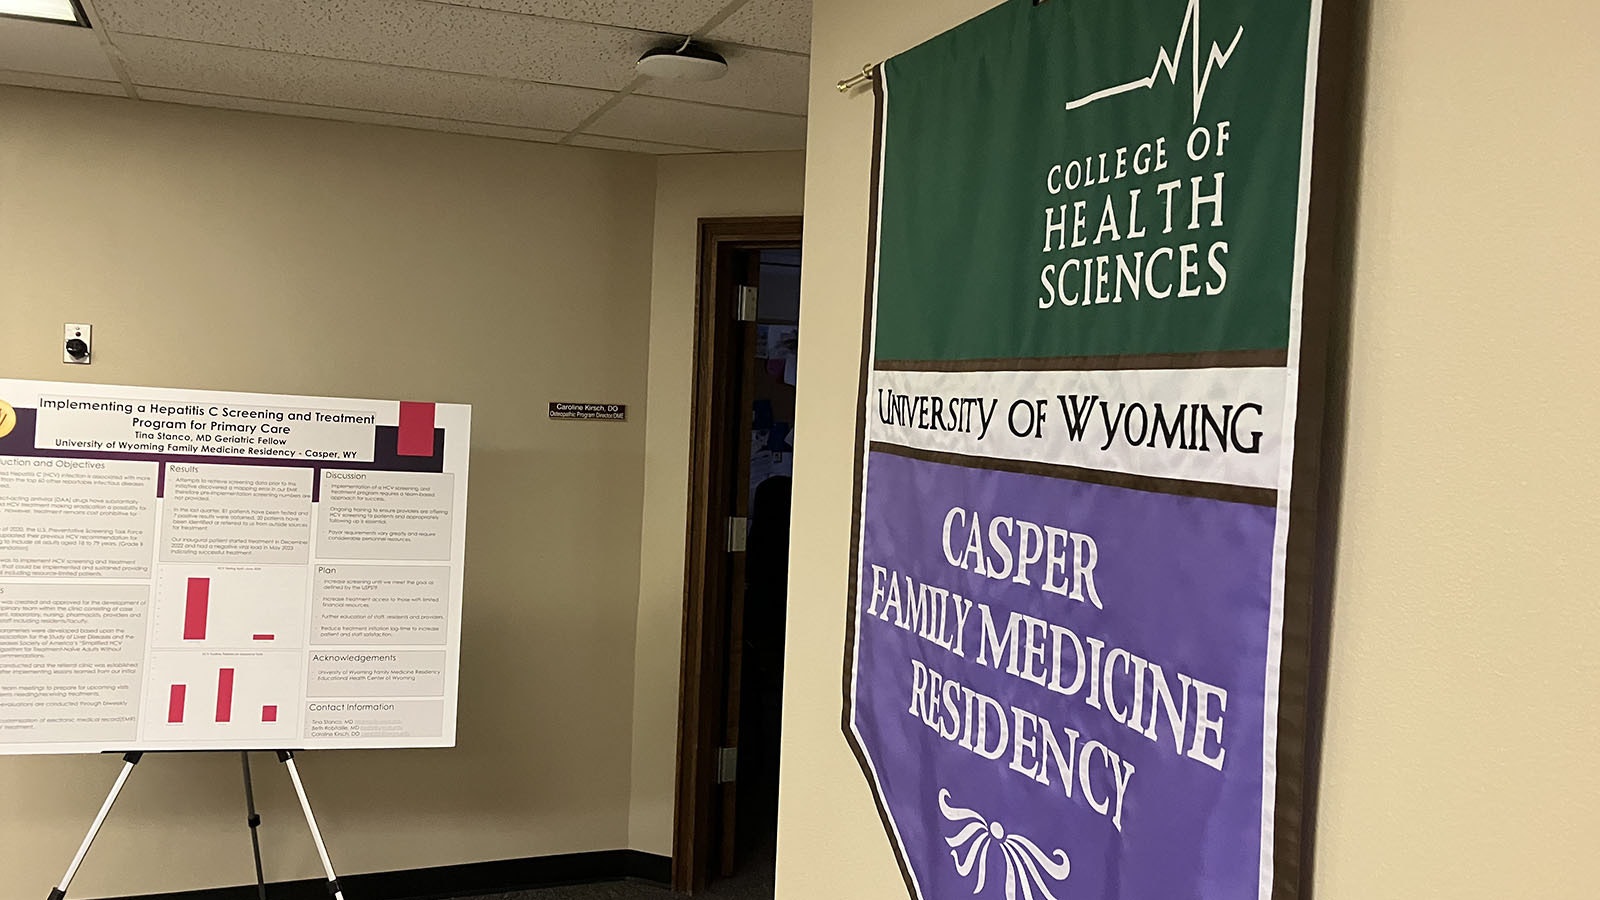 Family Medicine Residency residents work on quality measures as shown by the poster on hepatitis screening and treatment at left.